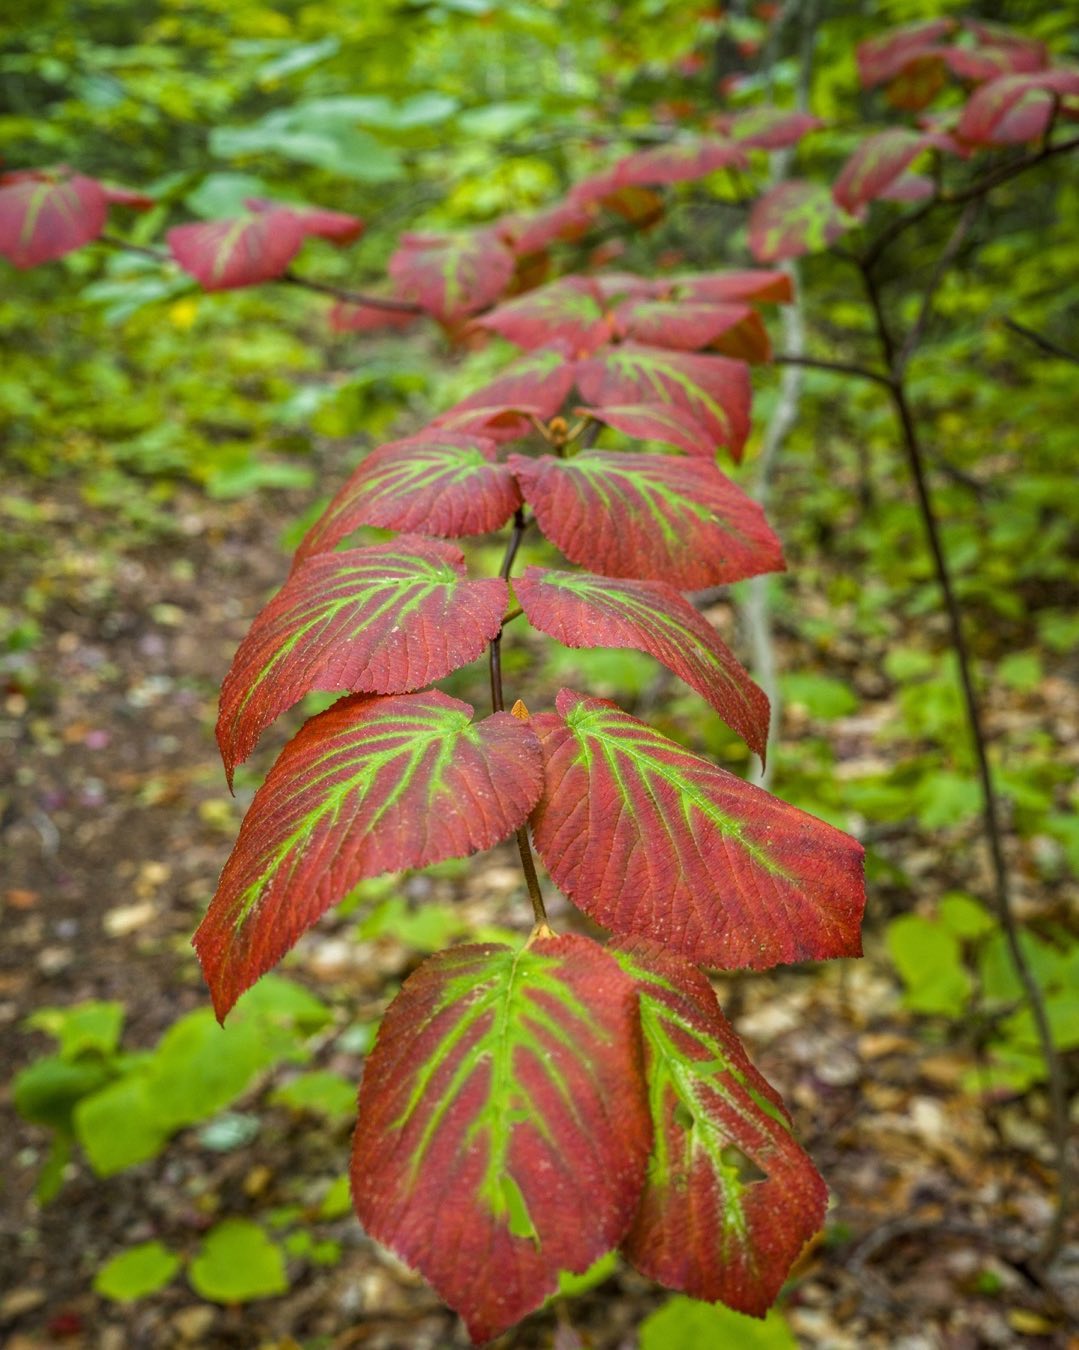 Wild viburnum in a showy early autumn costume along the Fire Warden’s Trail to Mt Abraham this week. These plants display quite a range of colors as one of the first species to announcing the change of seasons. #fallfoliage #wildviburnum #kingfieldmaine #mtabraham #orcuttphotography